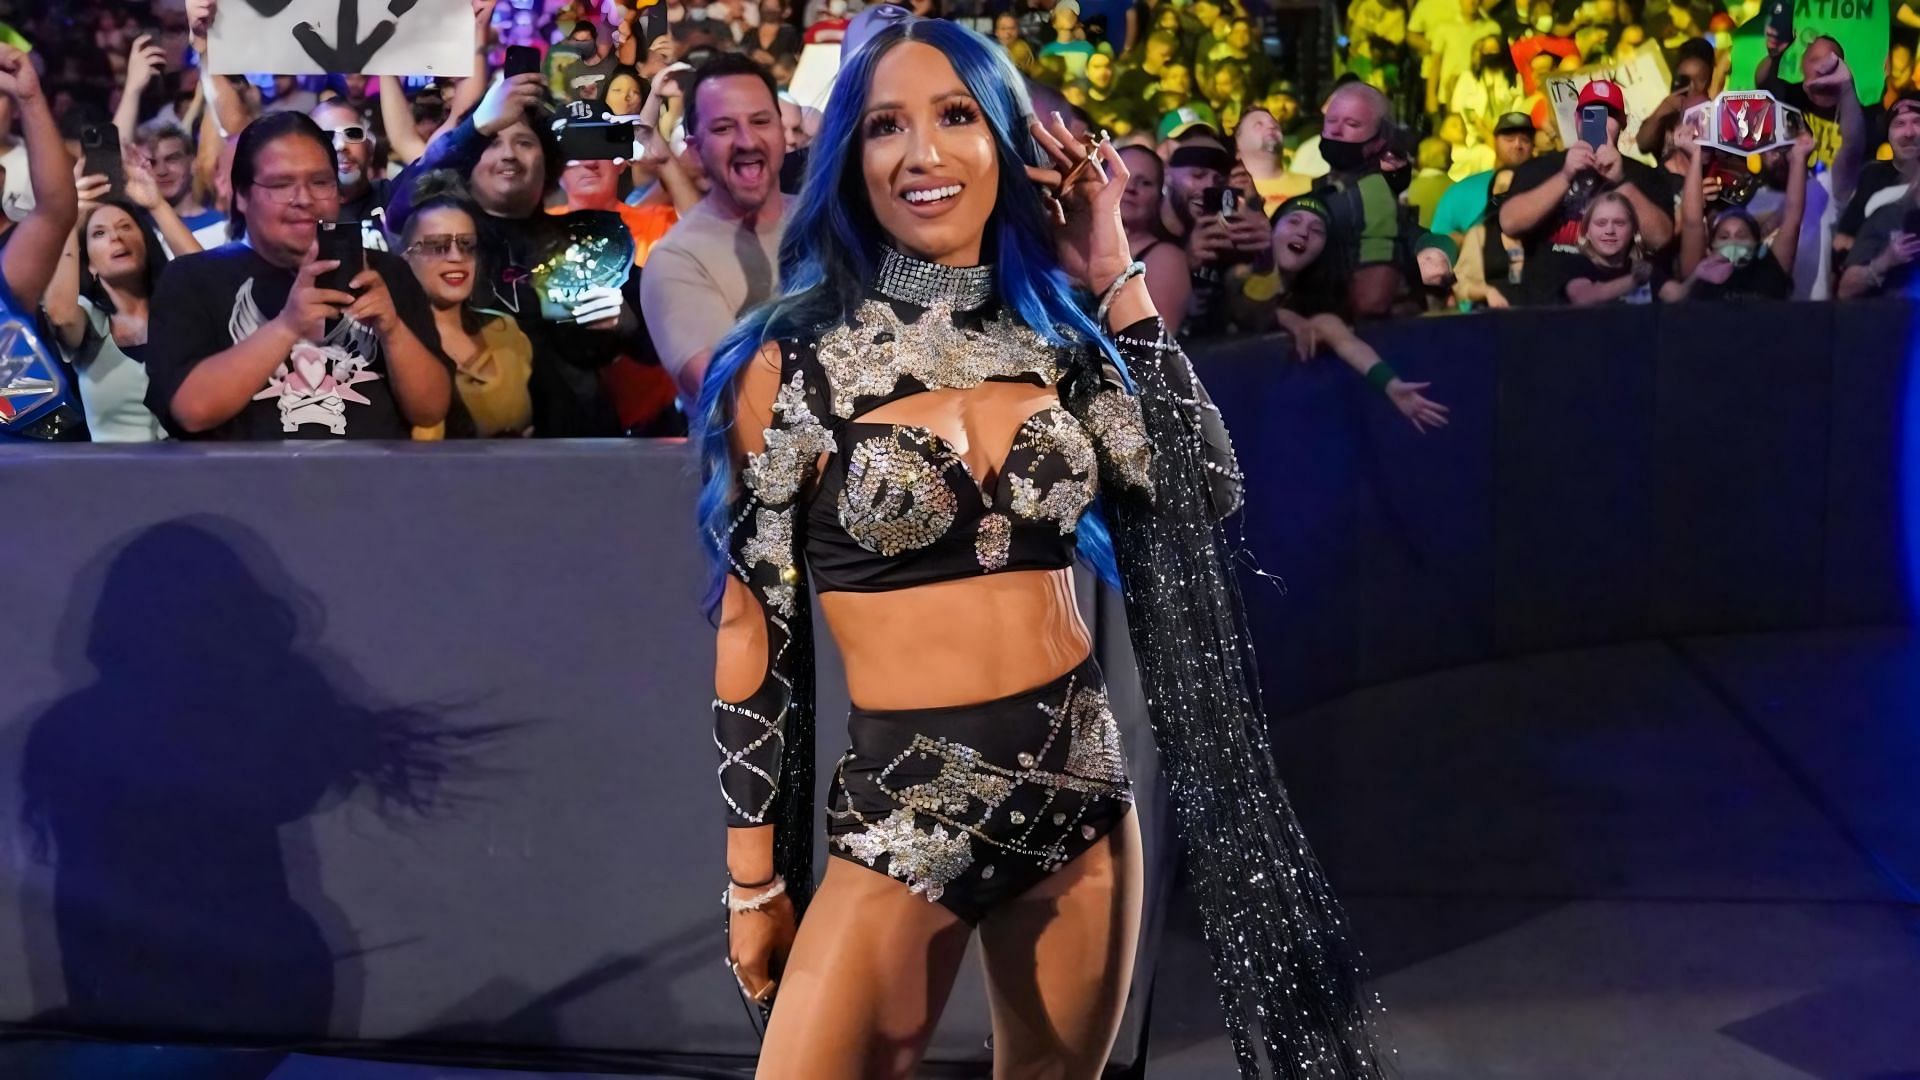 Sasha Banks is reportedly moving toward a WWE release